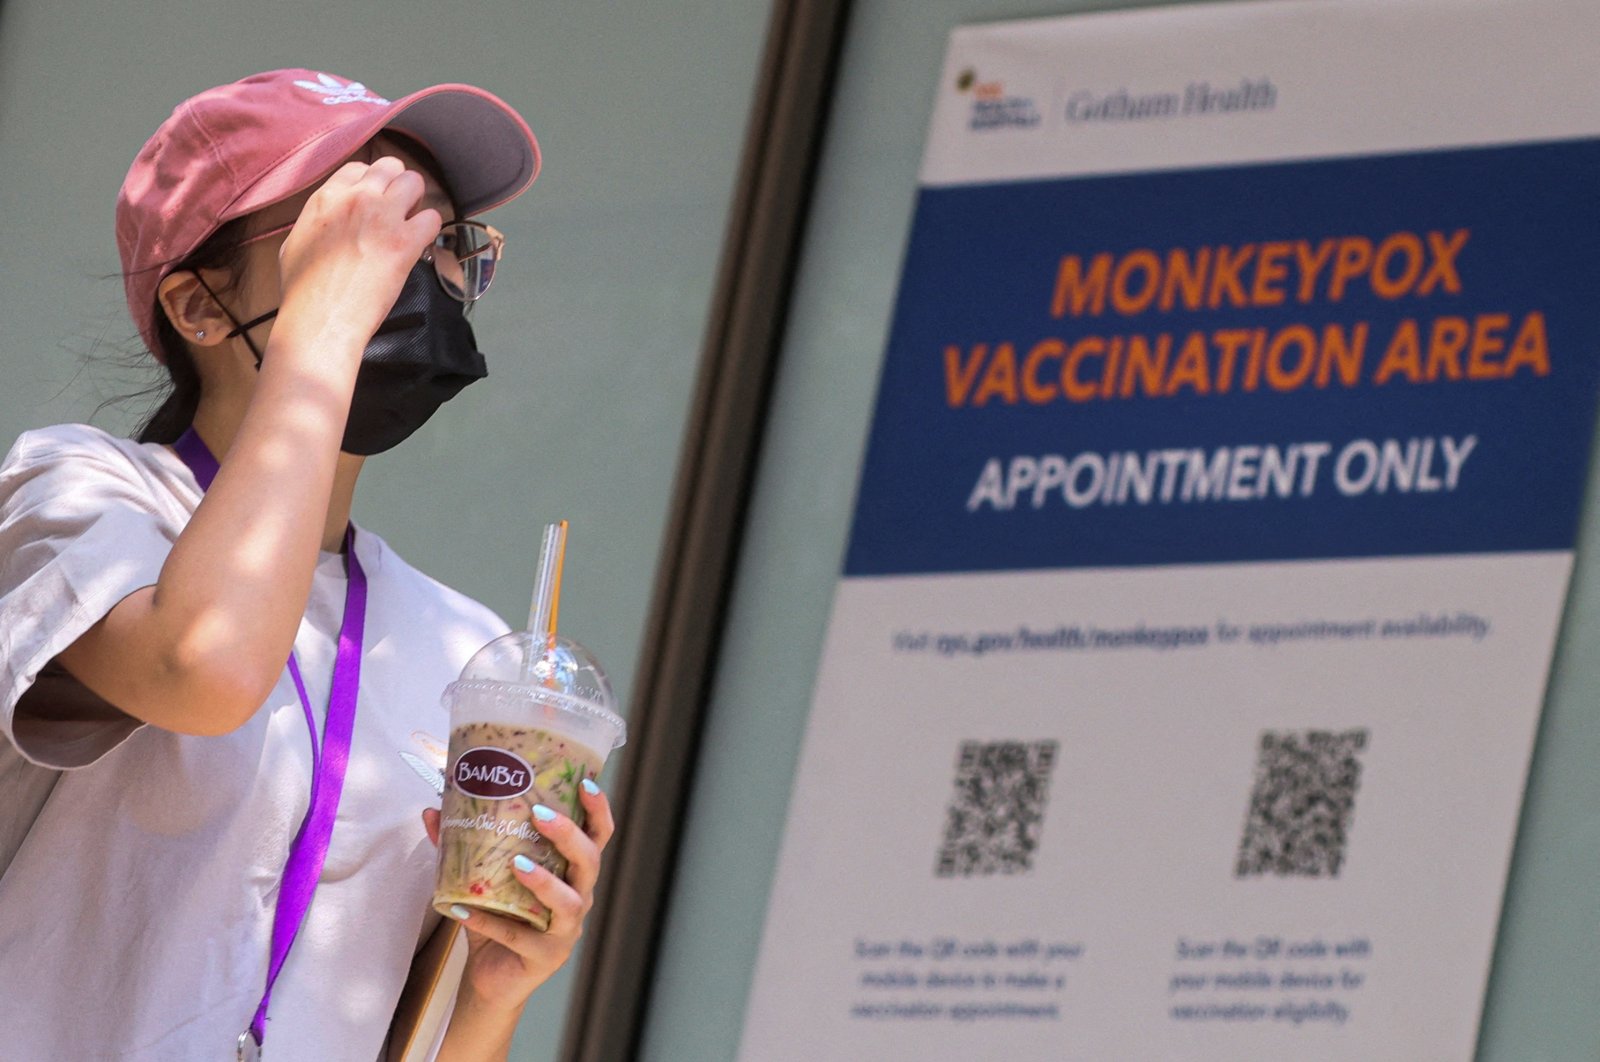 A woman arrives at a monkeypox vaccination site in New York City, U.S., Aug. 15, 2022. (Reuters Photo)